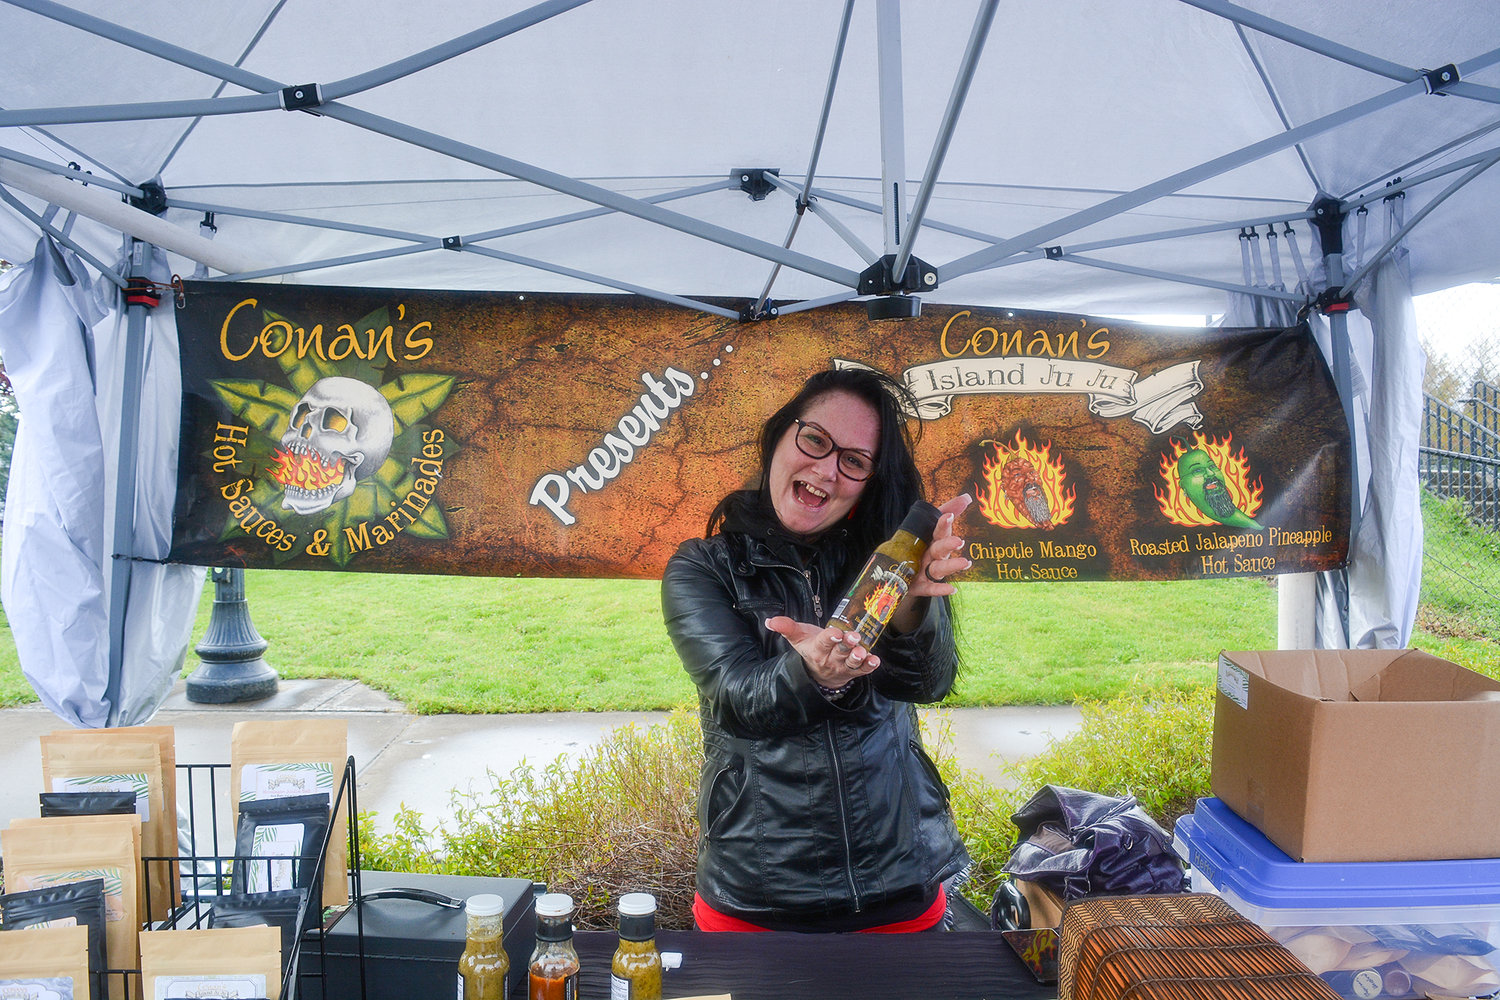 Fawn Hogue presents Conan’s roasted habanero mango hot sauce at the Conan’s Hot Sauces and Marinades booth at the Battle Ground Farmers Market in the parking lot of the community center on May 12.